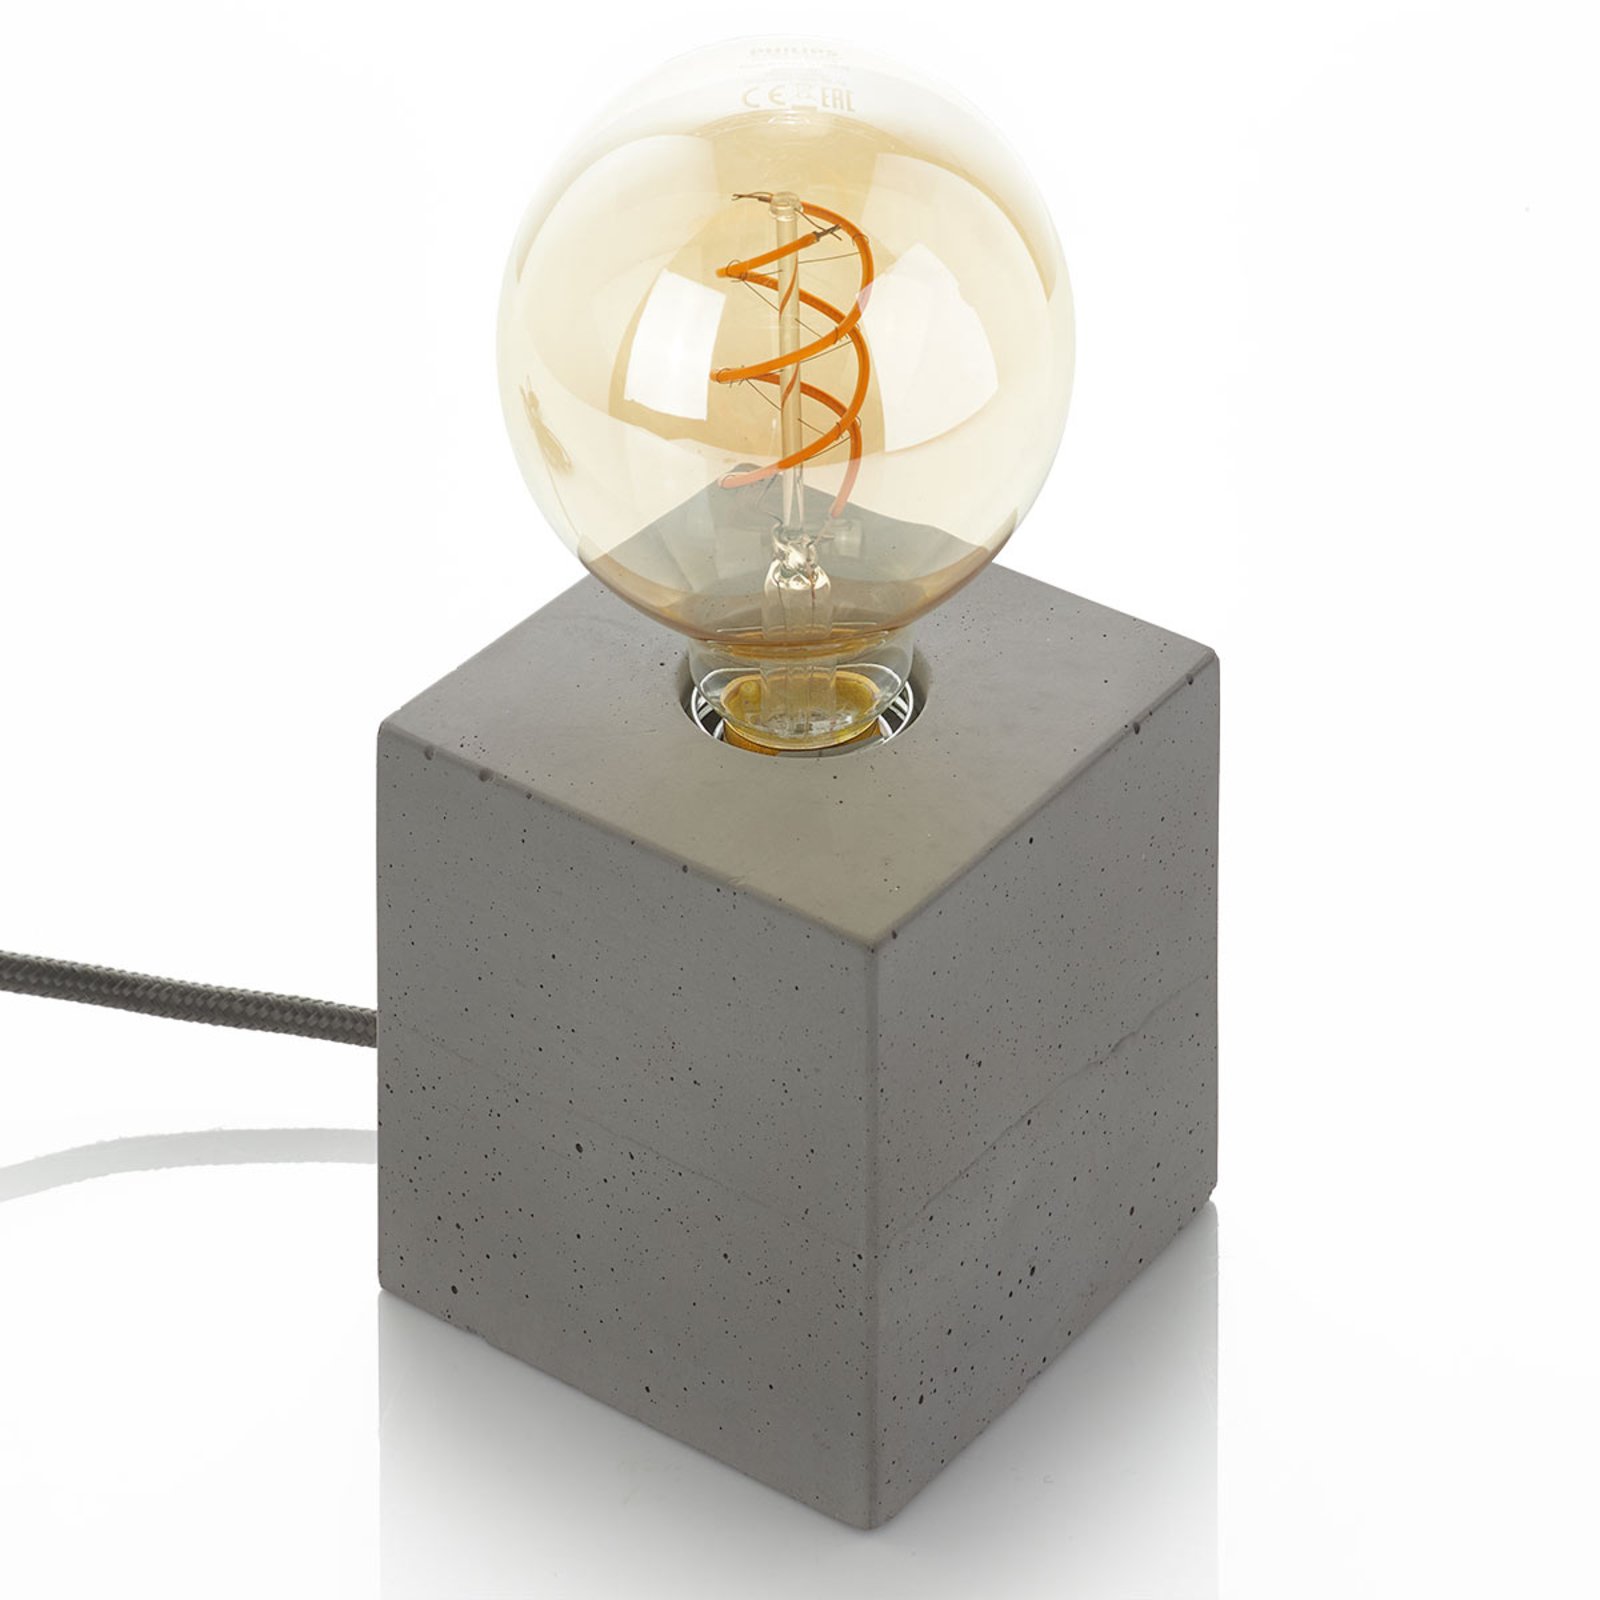 Modern table lamp Strong made of concrete